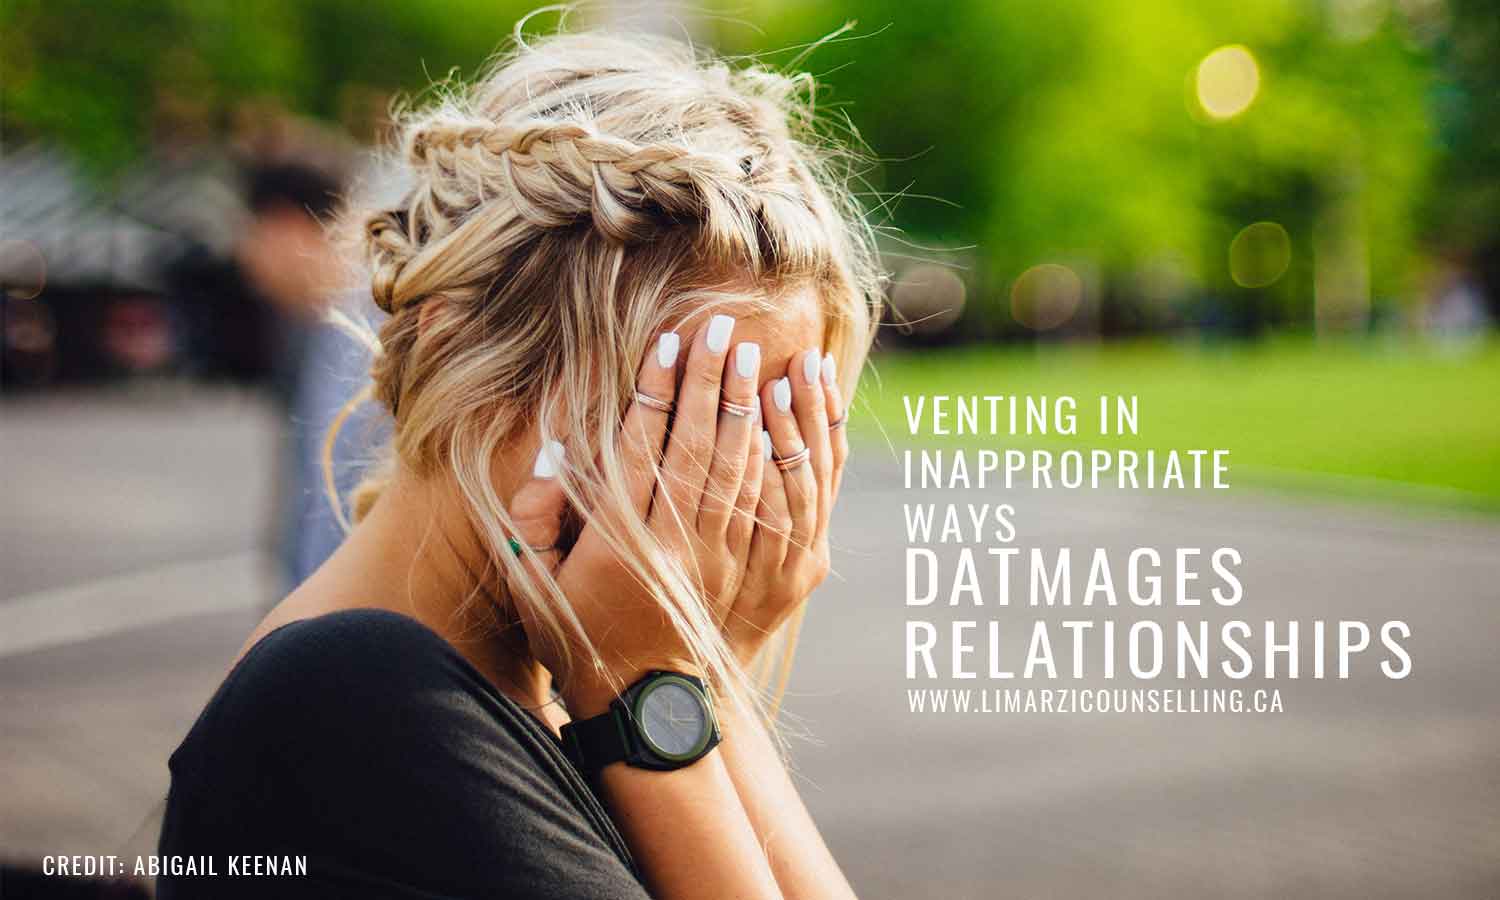 Venting in inappropriate ways damages relationships